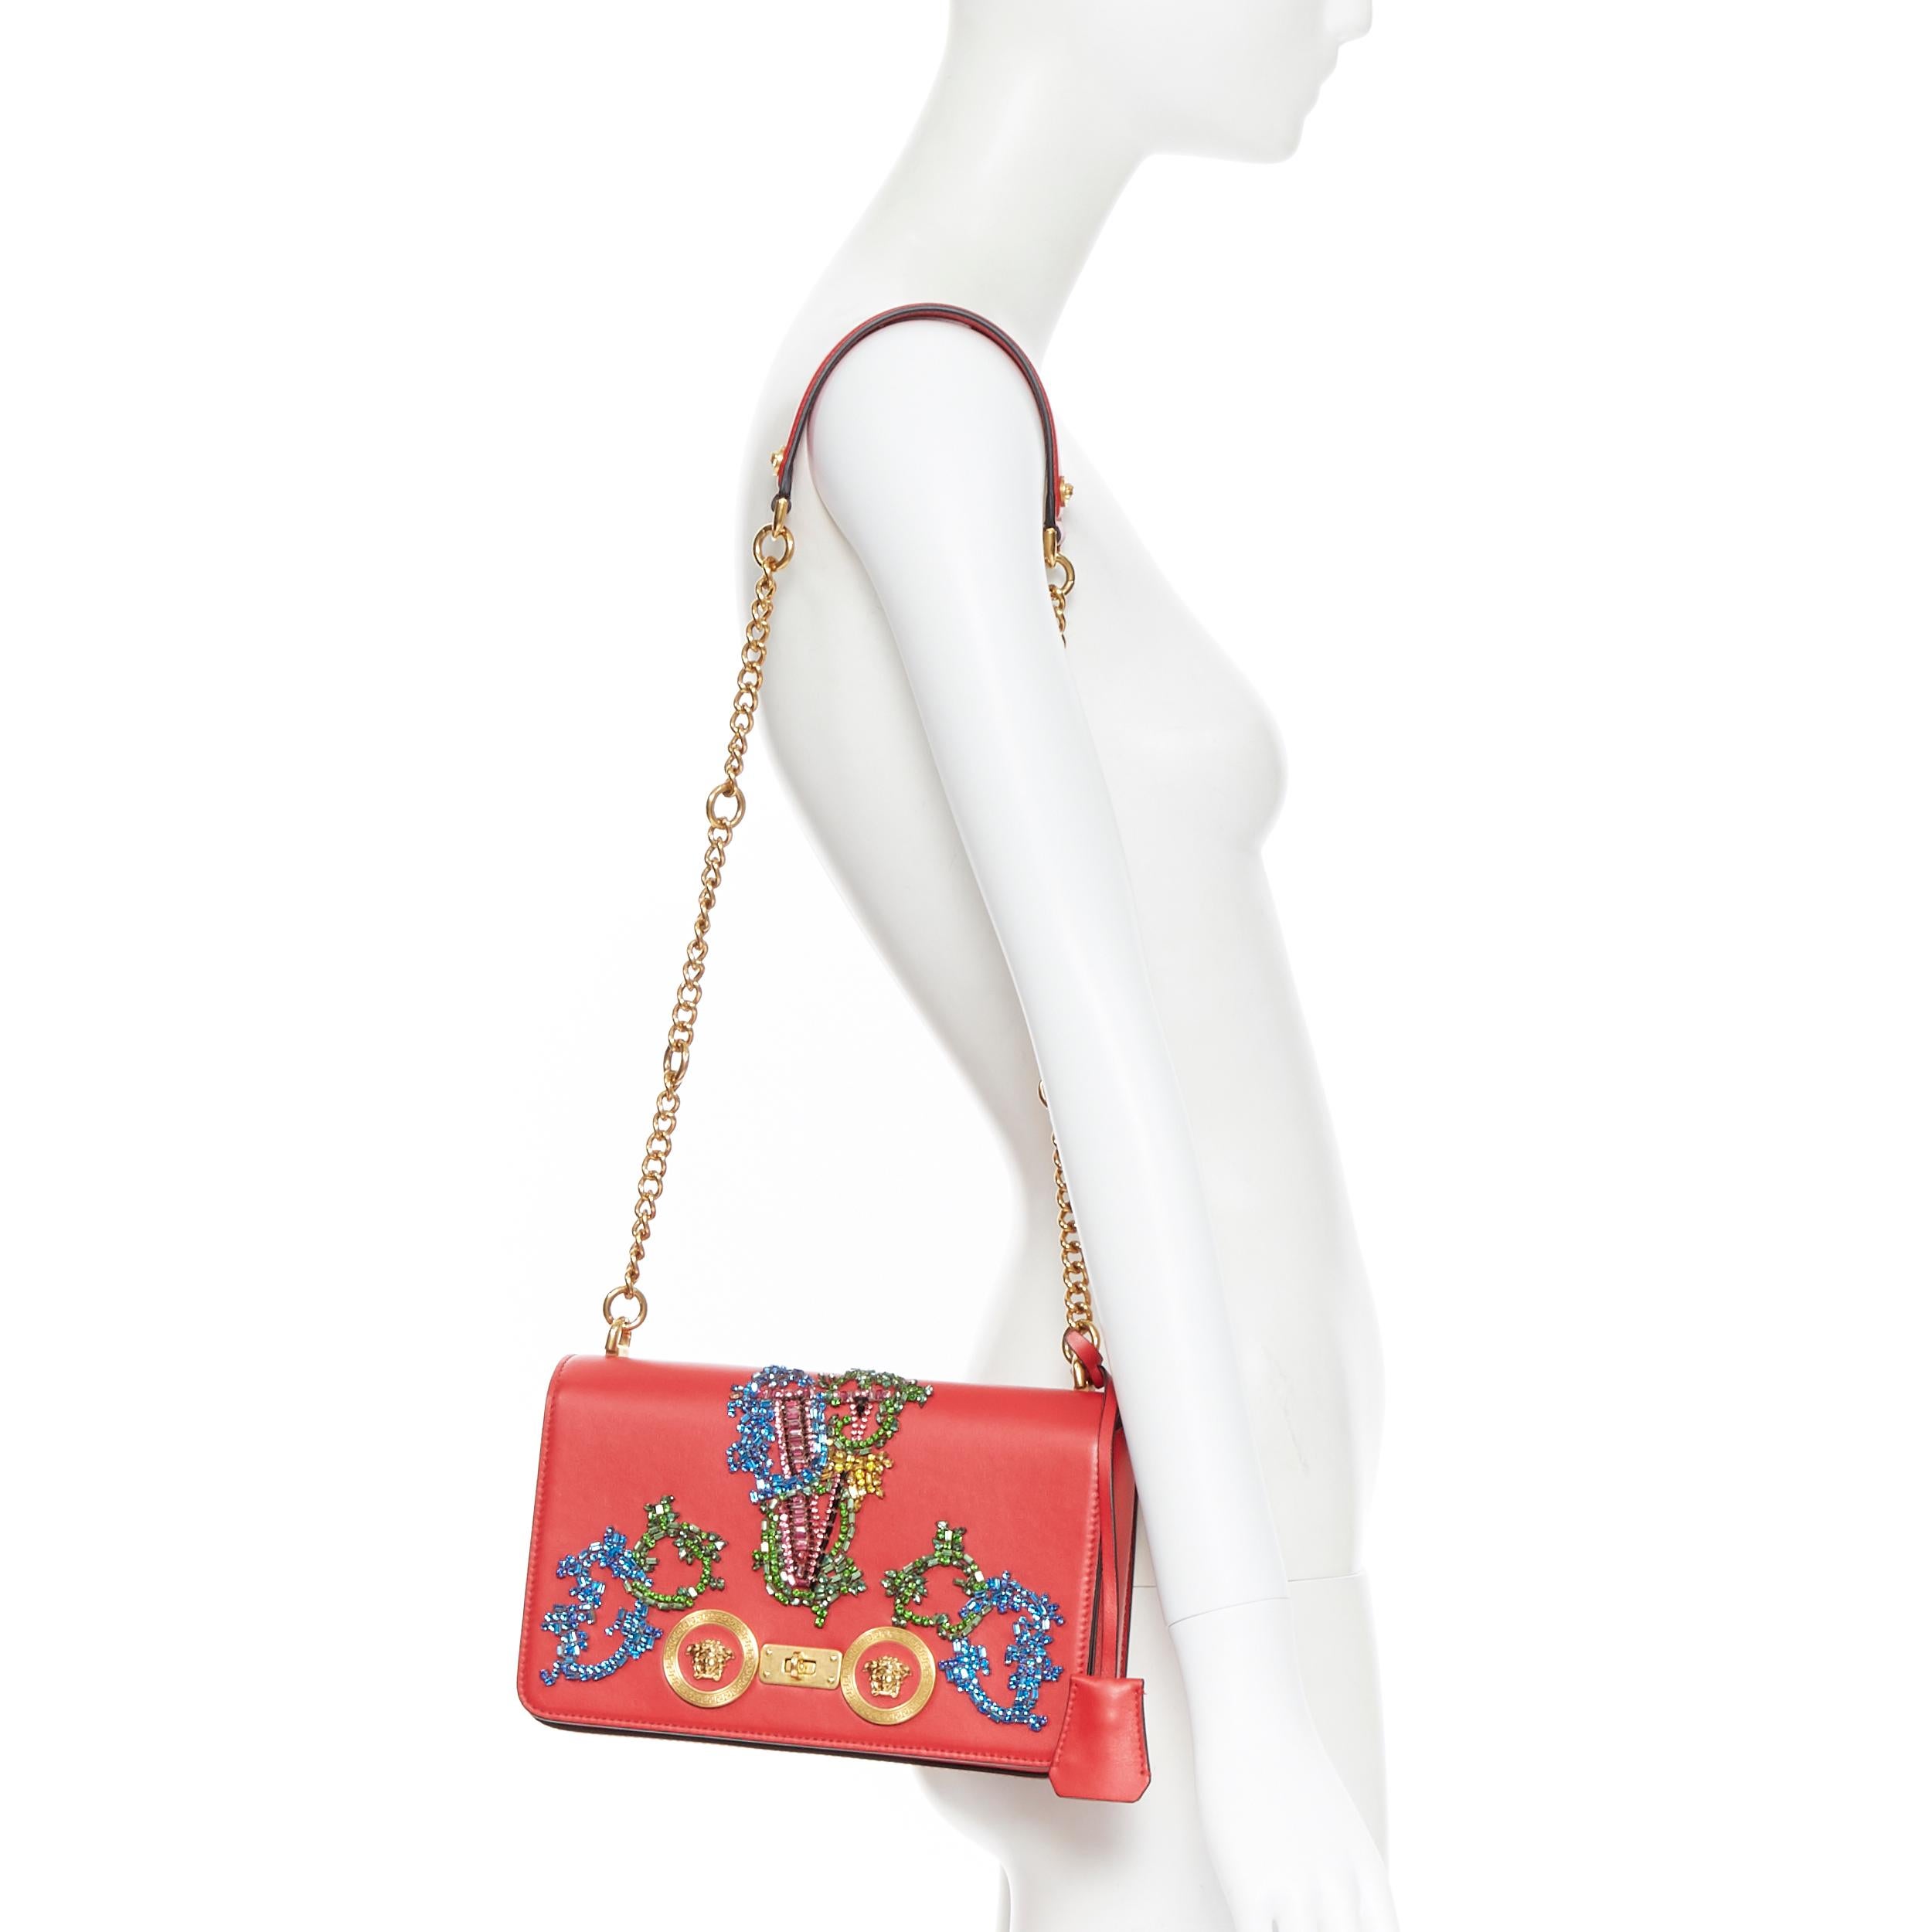 new VERSACE Medium Icon red baroque Virtus V crystal embellished Medusa bag
Brand: Versace
Designer: Donatella Versace
Collection: 2019
Model Name / Style: Medium Icon
Material: Leather
Color: Red
Pattern: Abstract
Closure: Turnlock
Lining material: